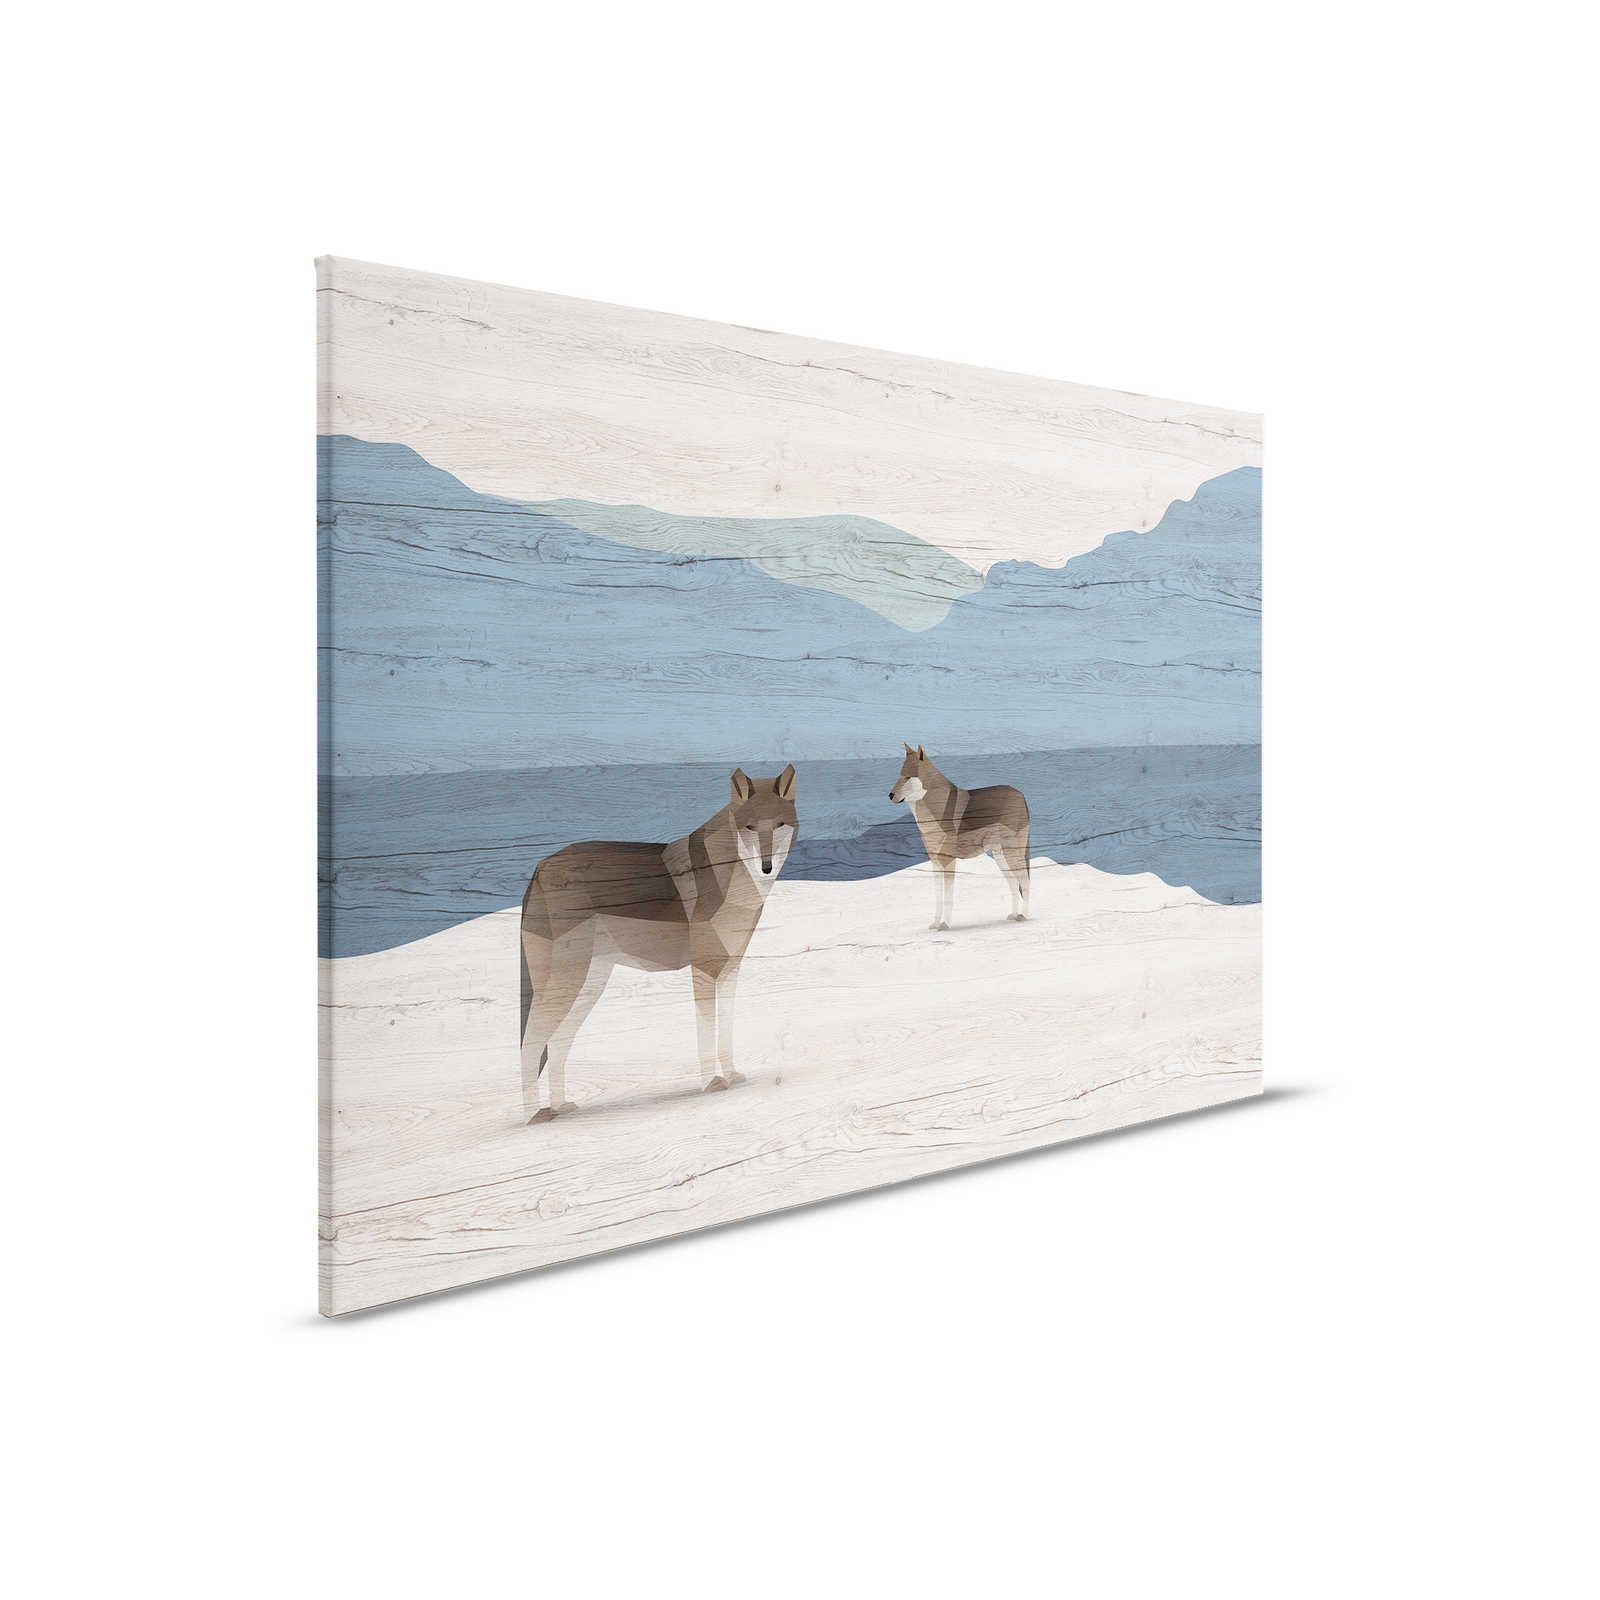         Yukon 1 - Canvas painting Mountains & Dogs with wood texture - 0,90 m x 0,60 m
    